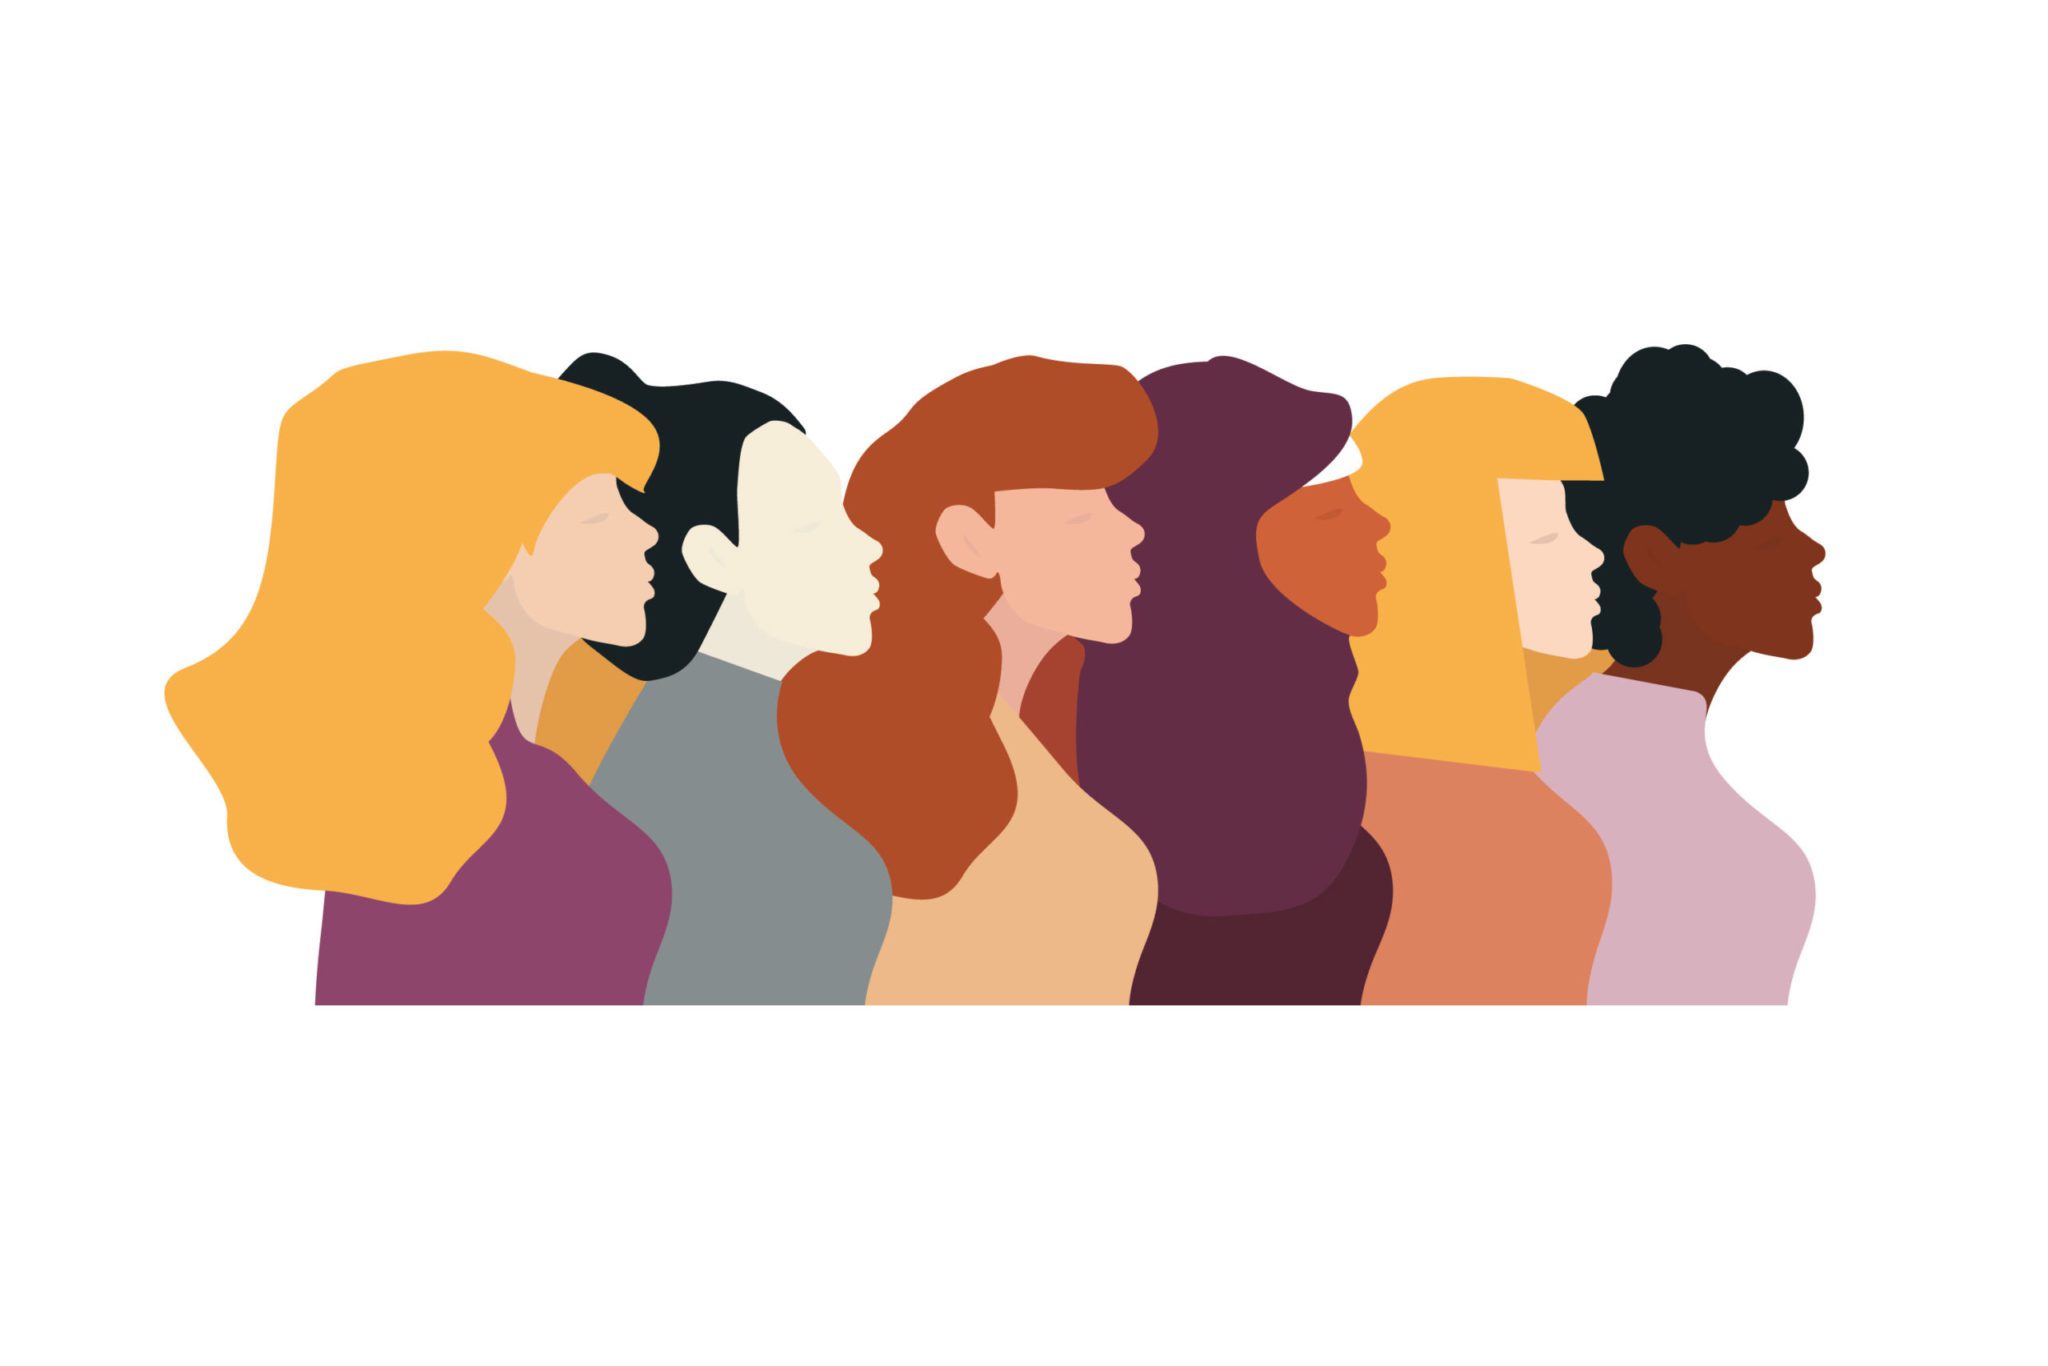 Illustration of side profiles of diverse women.